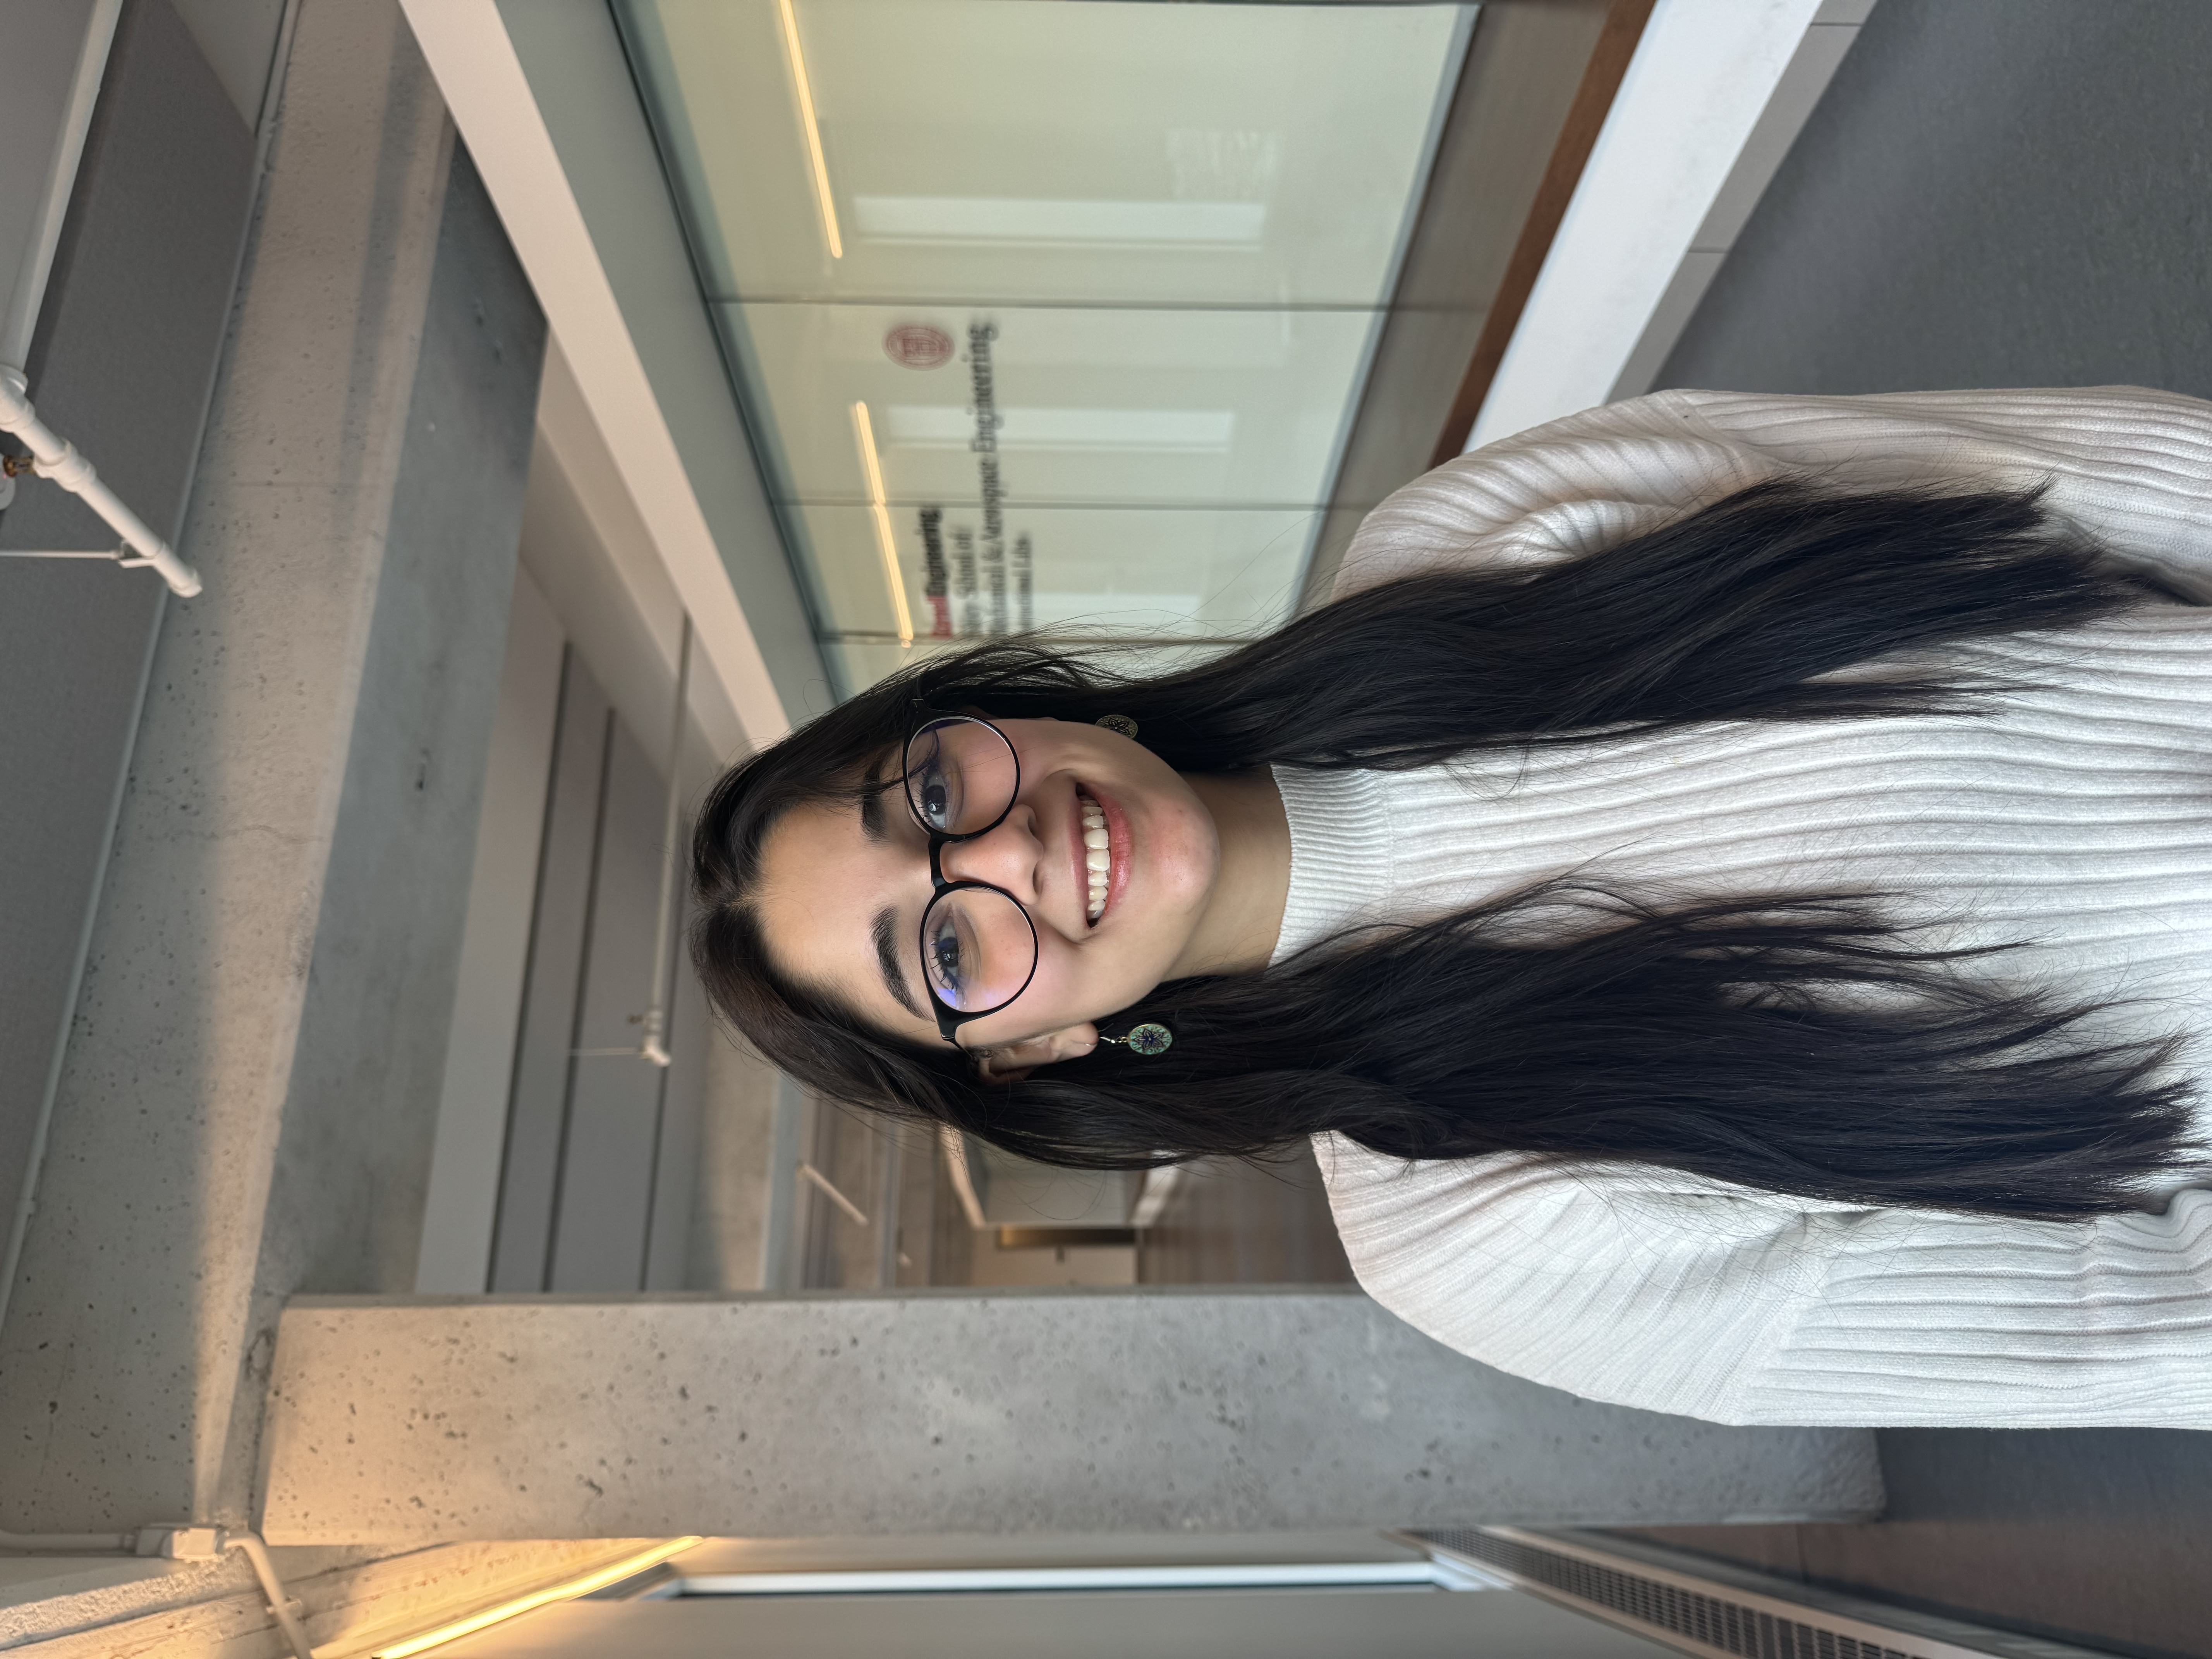 Meet Kenza Daoudi! <br><br>
              Freshman studying Computer Science and Economics (at CAS where I am a Milstein and Davis scholar. 
              As part of EIA's business sub-team, I am responsible for website management and corporate sponsorships. 
              Enjoys different music genres from afro beats to house music, traveling and learning about different cultures. Fun fact: lived in 3 different countries so far.